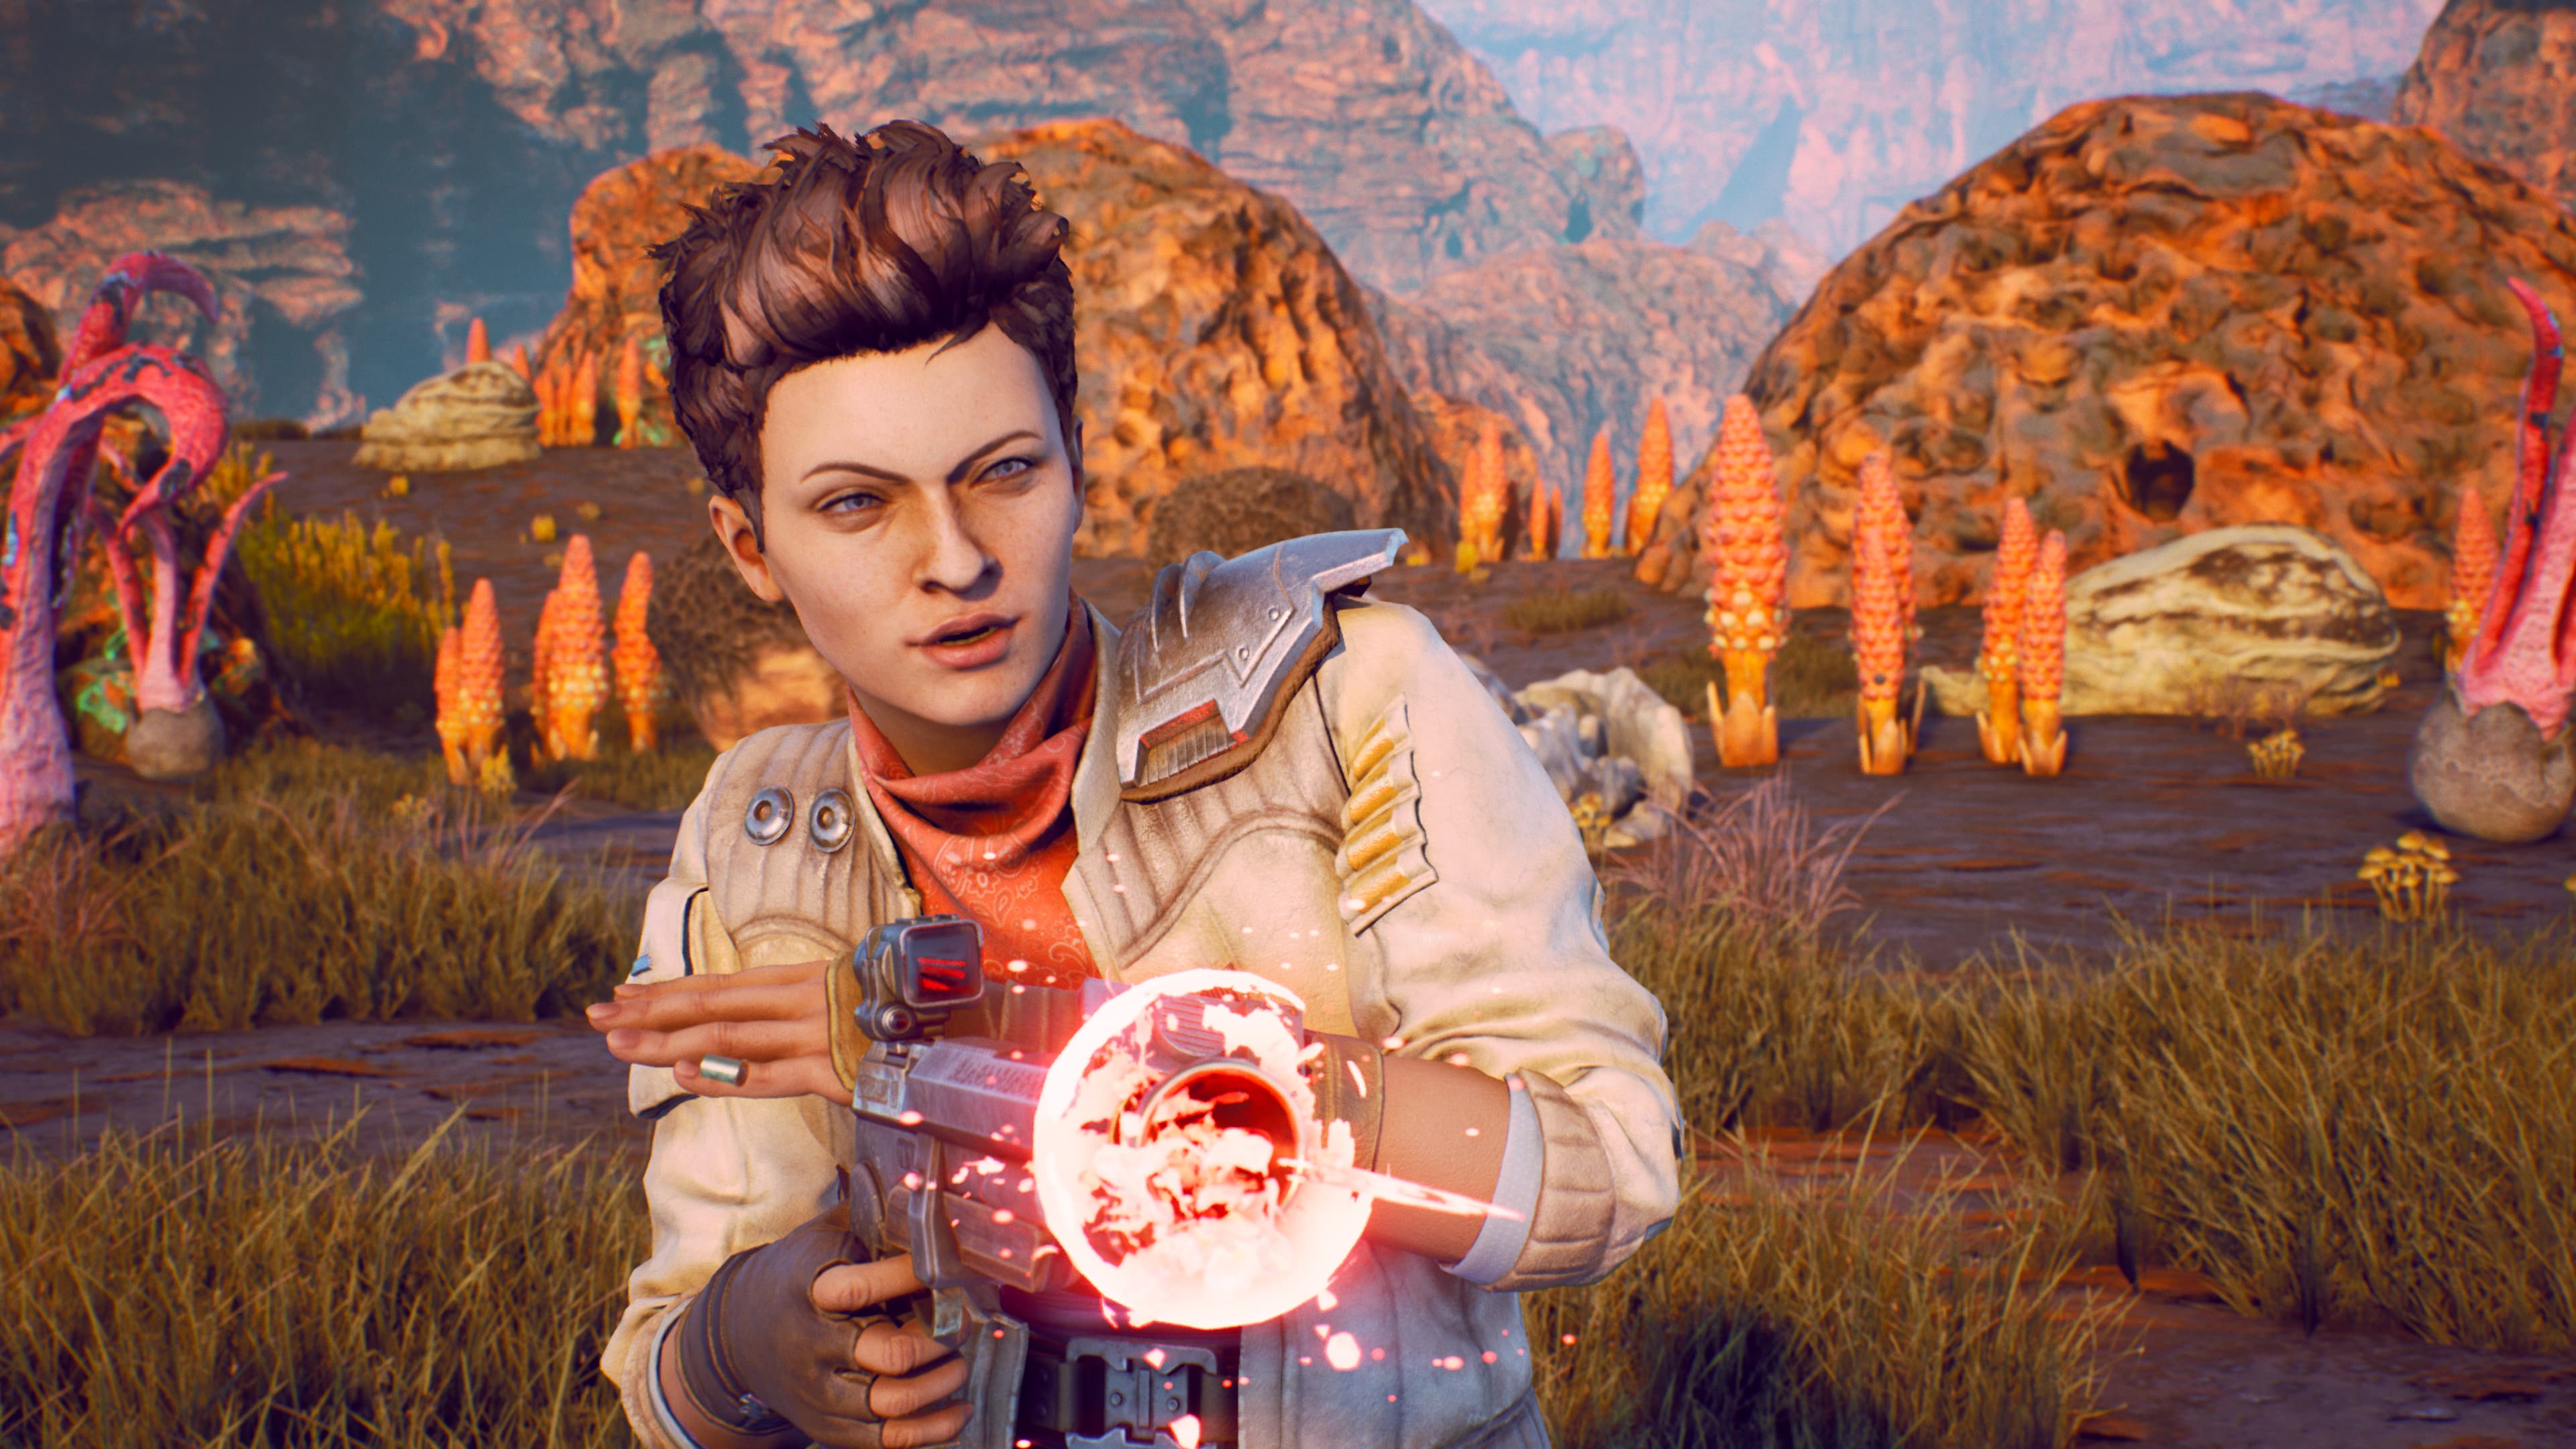 Buy The Outer Worlds 2 Other